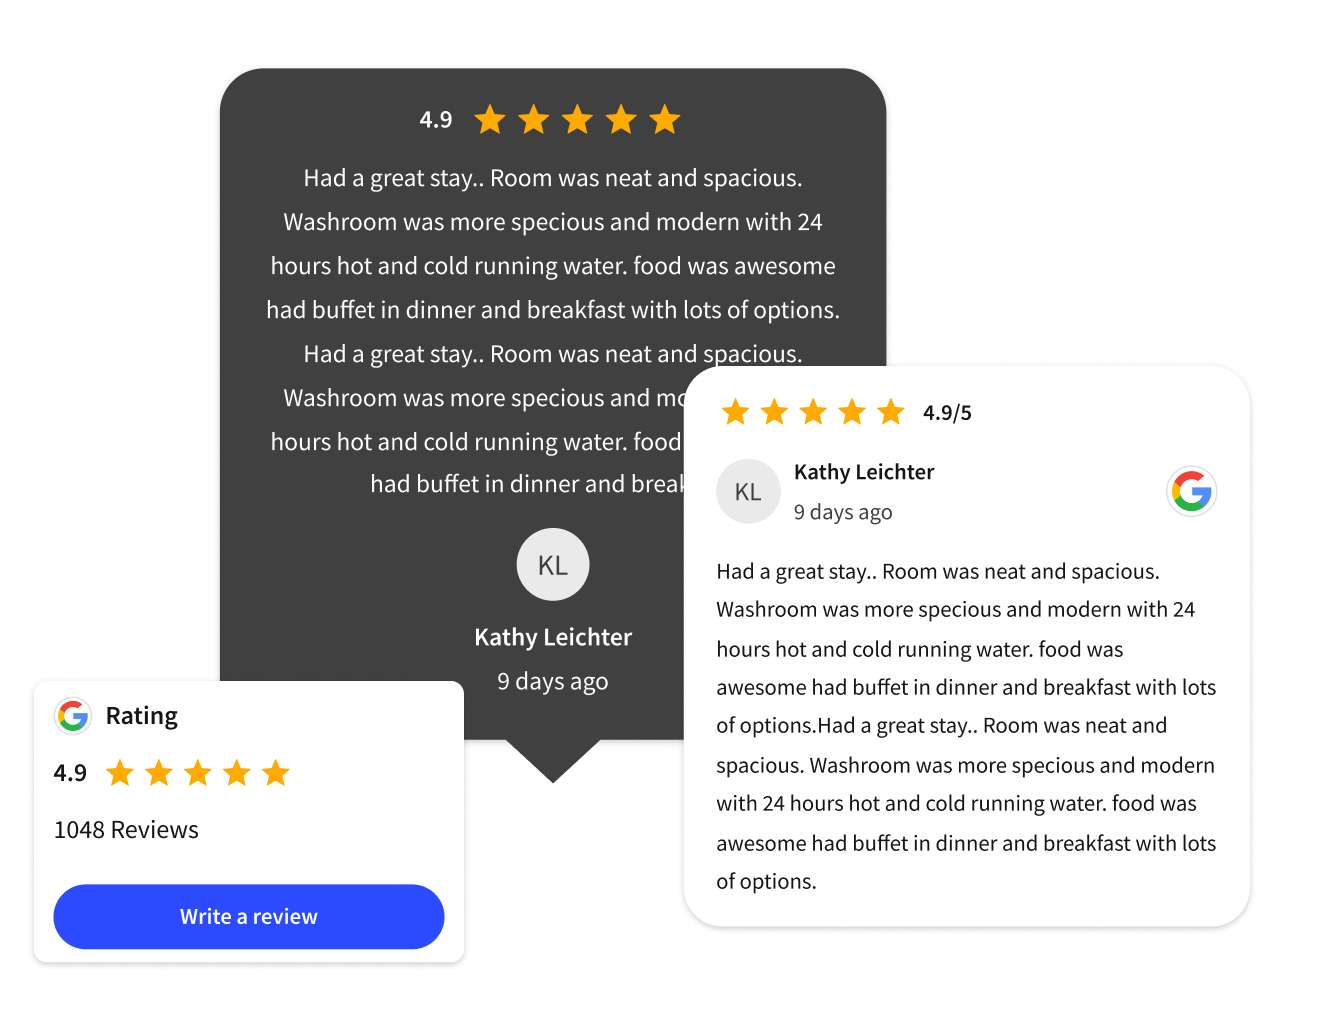 Online review card displaying a high rating of 4.9 stars from a customer named Kathy Leichter, praising the neat and spacious room, modern washroom, and excellent food options at a hotel.